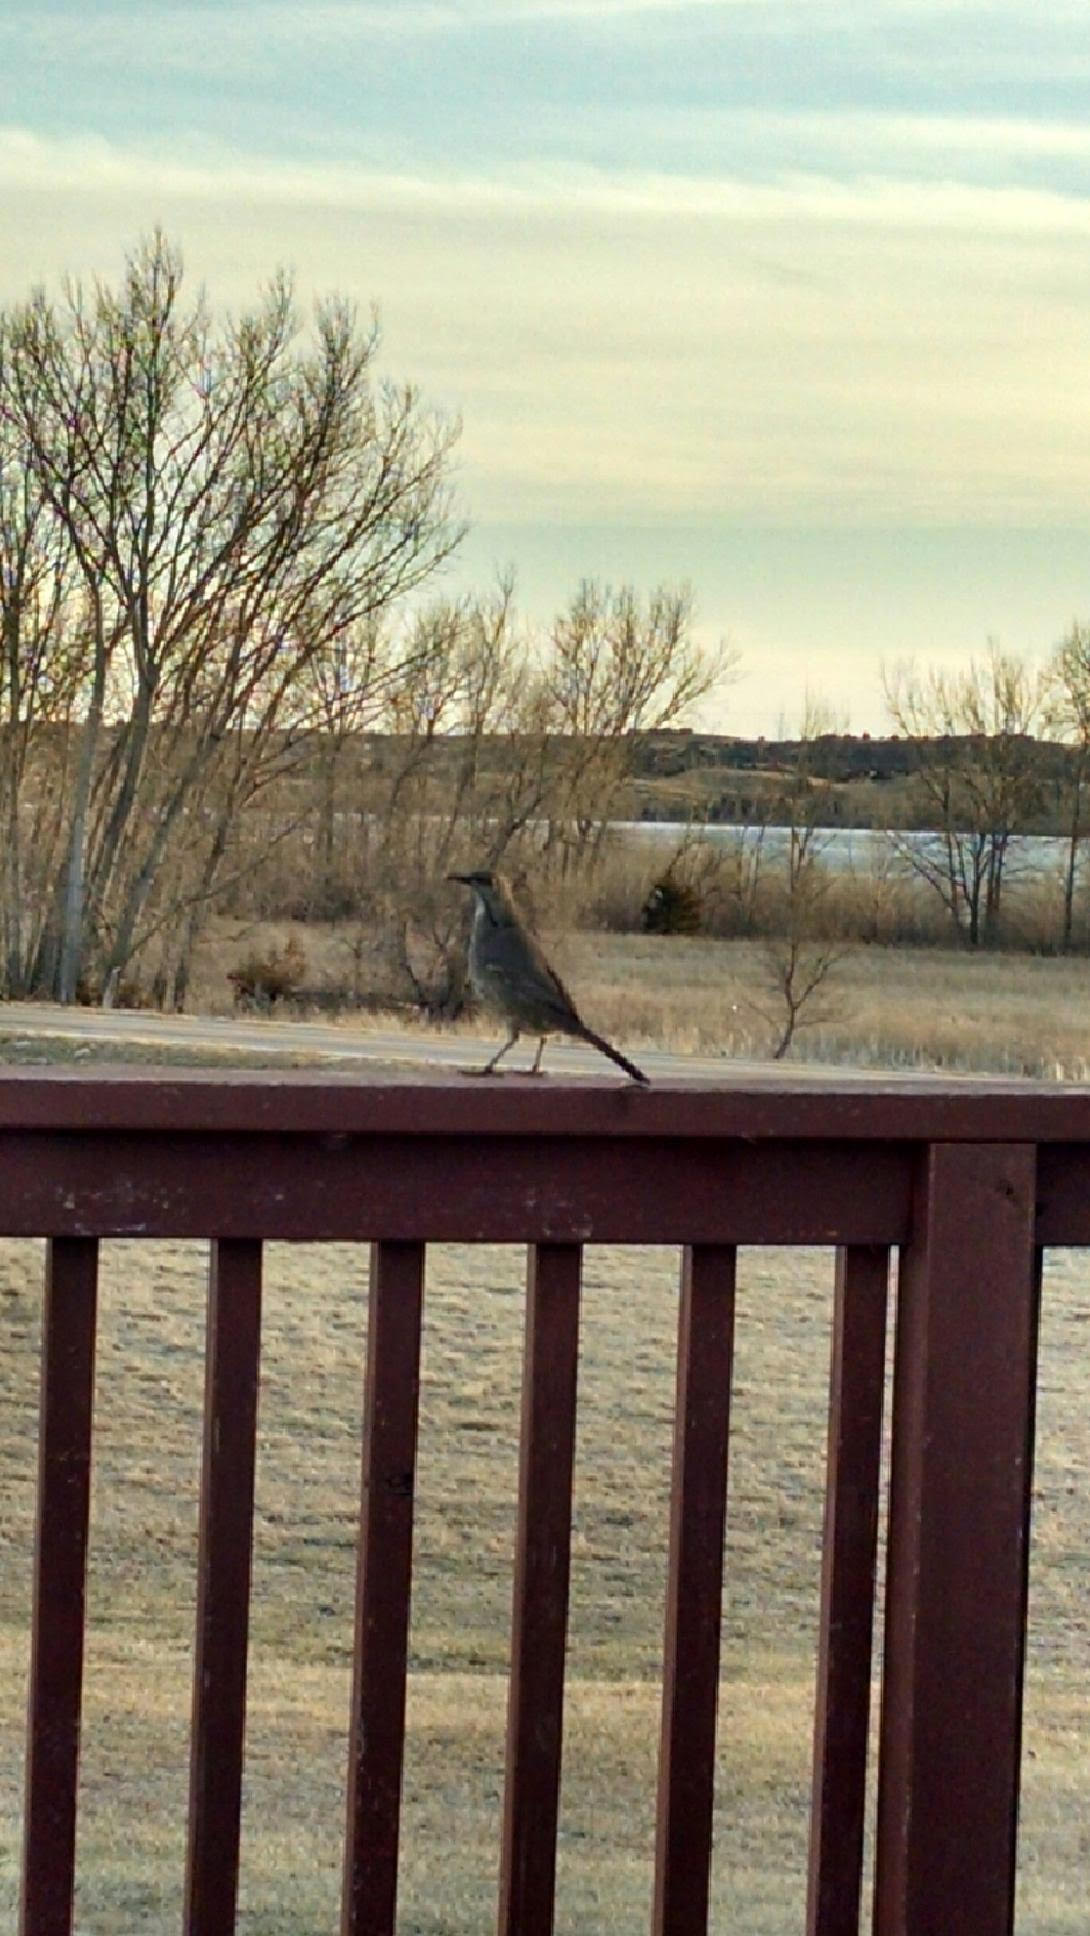 The biggest surprise of the trip was seeing a photo on Teresa Switzer's phone of what appears to be a Curve-billed Thrasher that visited their residence on 19 February. 